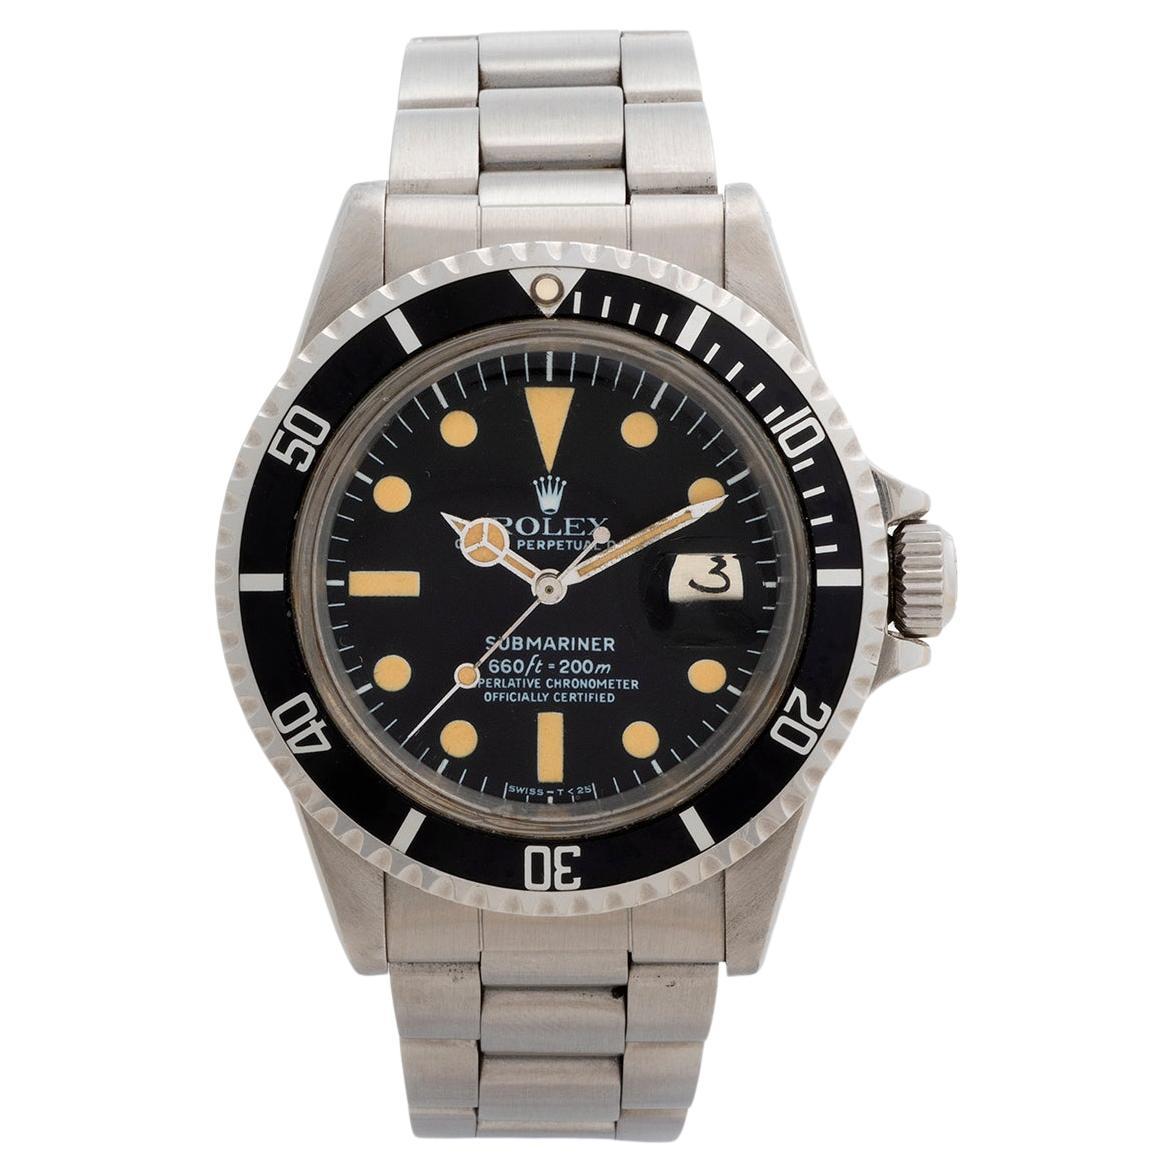 Our vintage and classic Rolex Submariner Date reference 1680 features a stainless steel 40mm case and stainless steel Oyster bracelet with flip lock clasp. The matte black dial and bezel, all of which have developed coeval patination, making for a